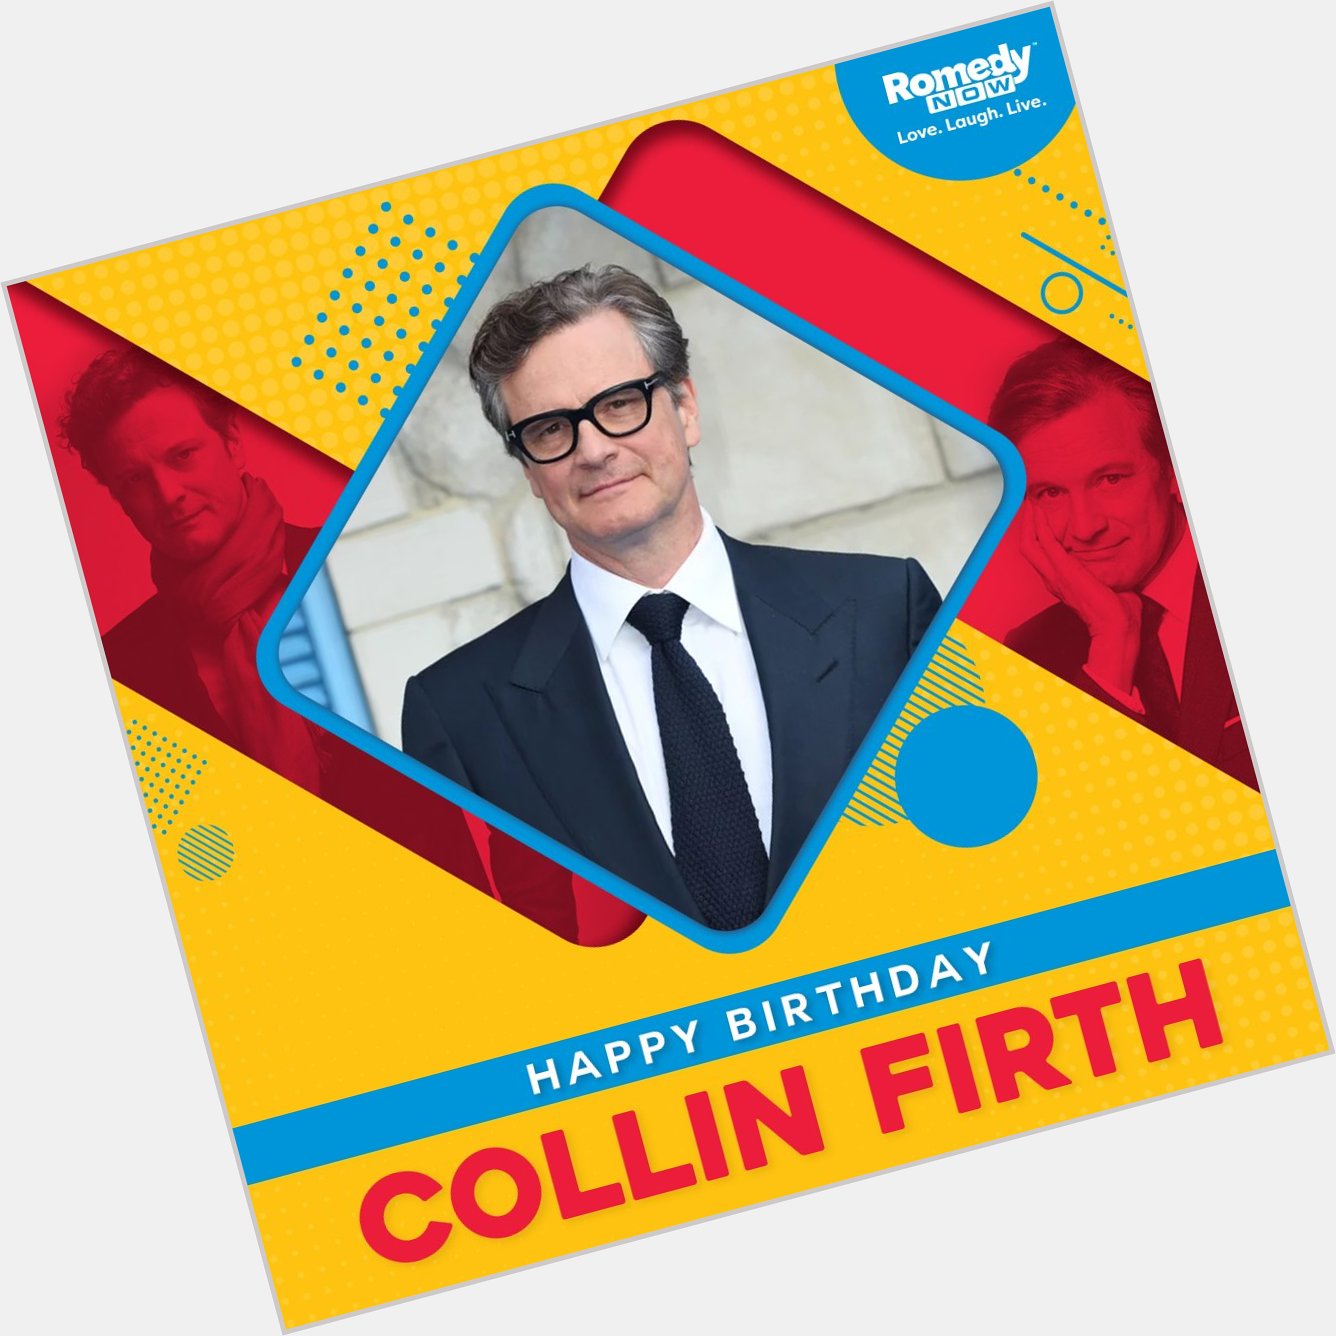 You have bewitched us and we love you! Happy birthday, Colin Firth.  